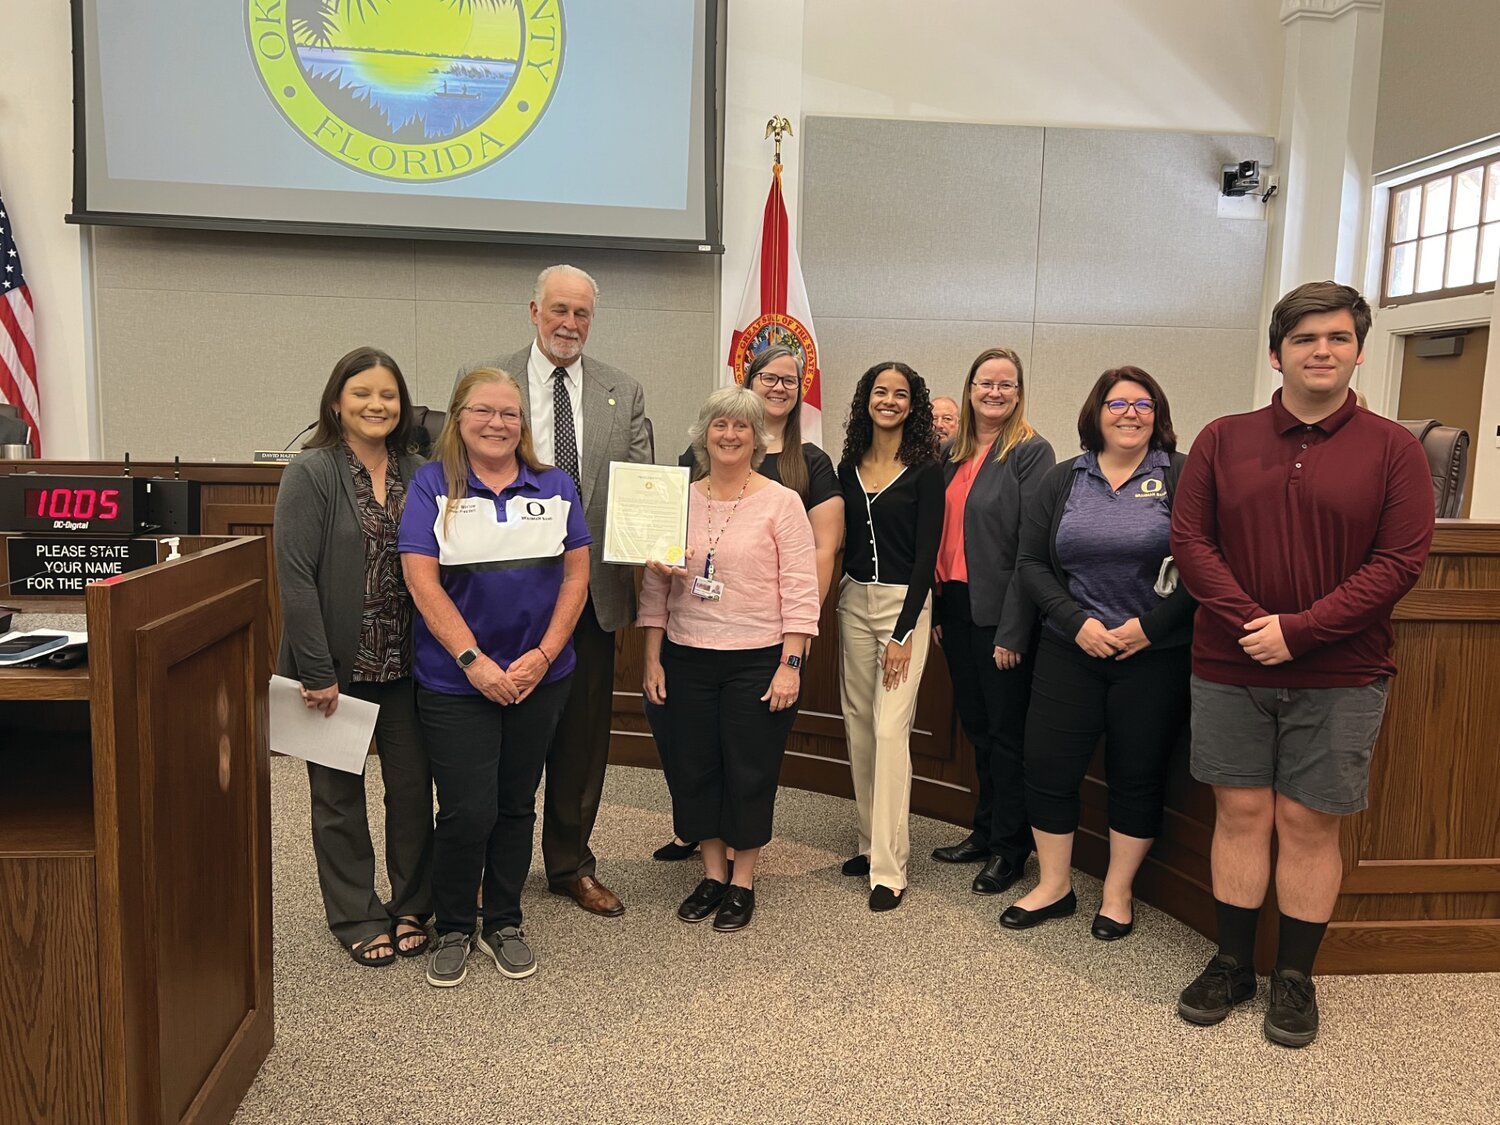 OKEECHOBEE -- At their March 14 meeting, the Okeechobee County Commission declared March as Music in Our Schools Month. [Photo by Katrina Elsken/Lake Okeechobee News]